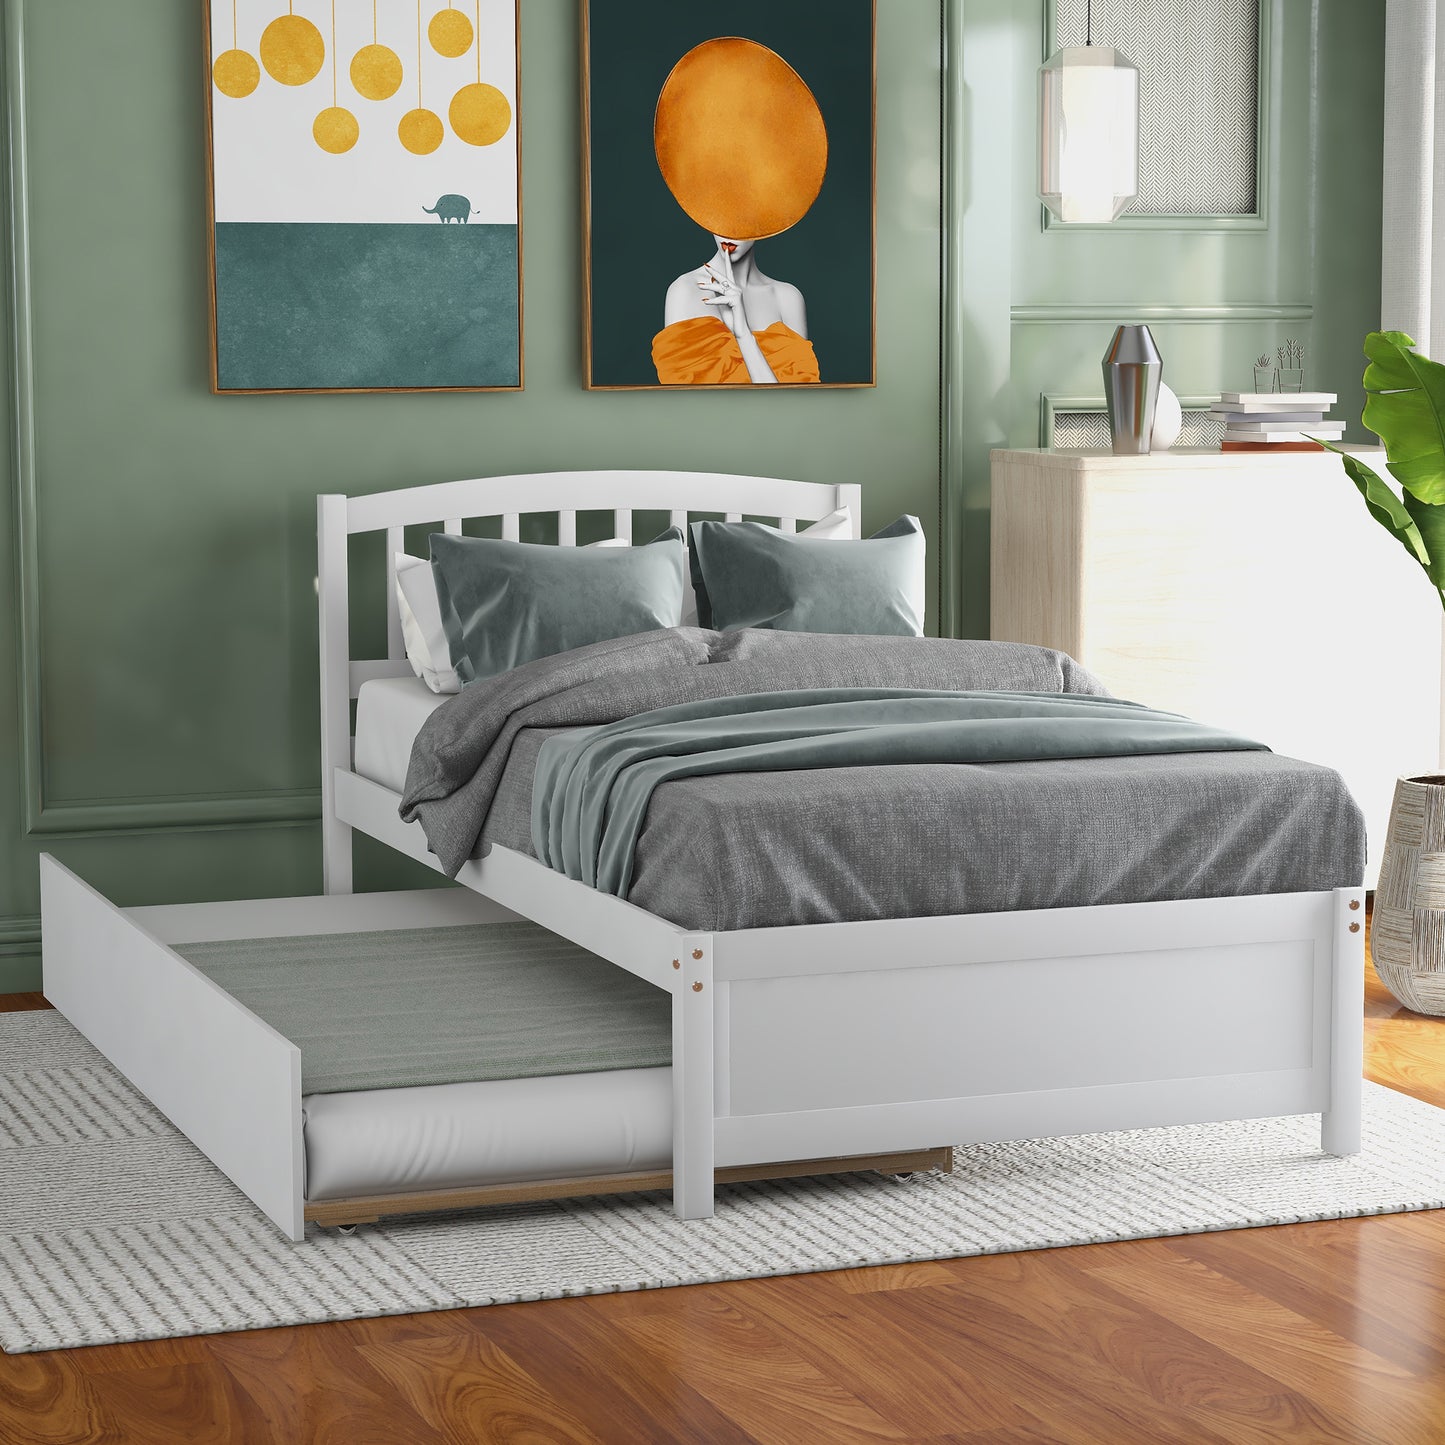 Twin Bed Frame with Trundle Included, Solid Pine Wood Platform Bed Frame for Kids Teens Adults, Espresso, LJ719